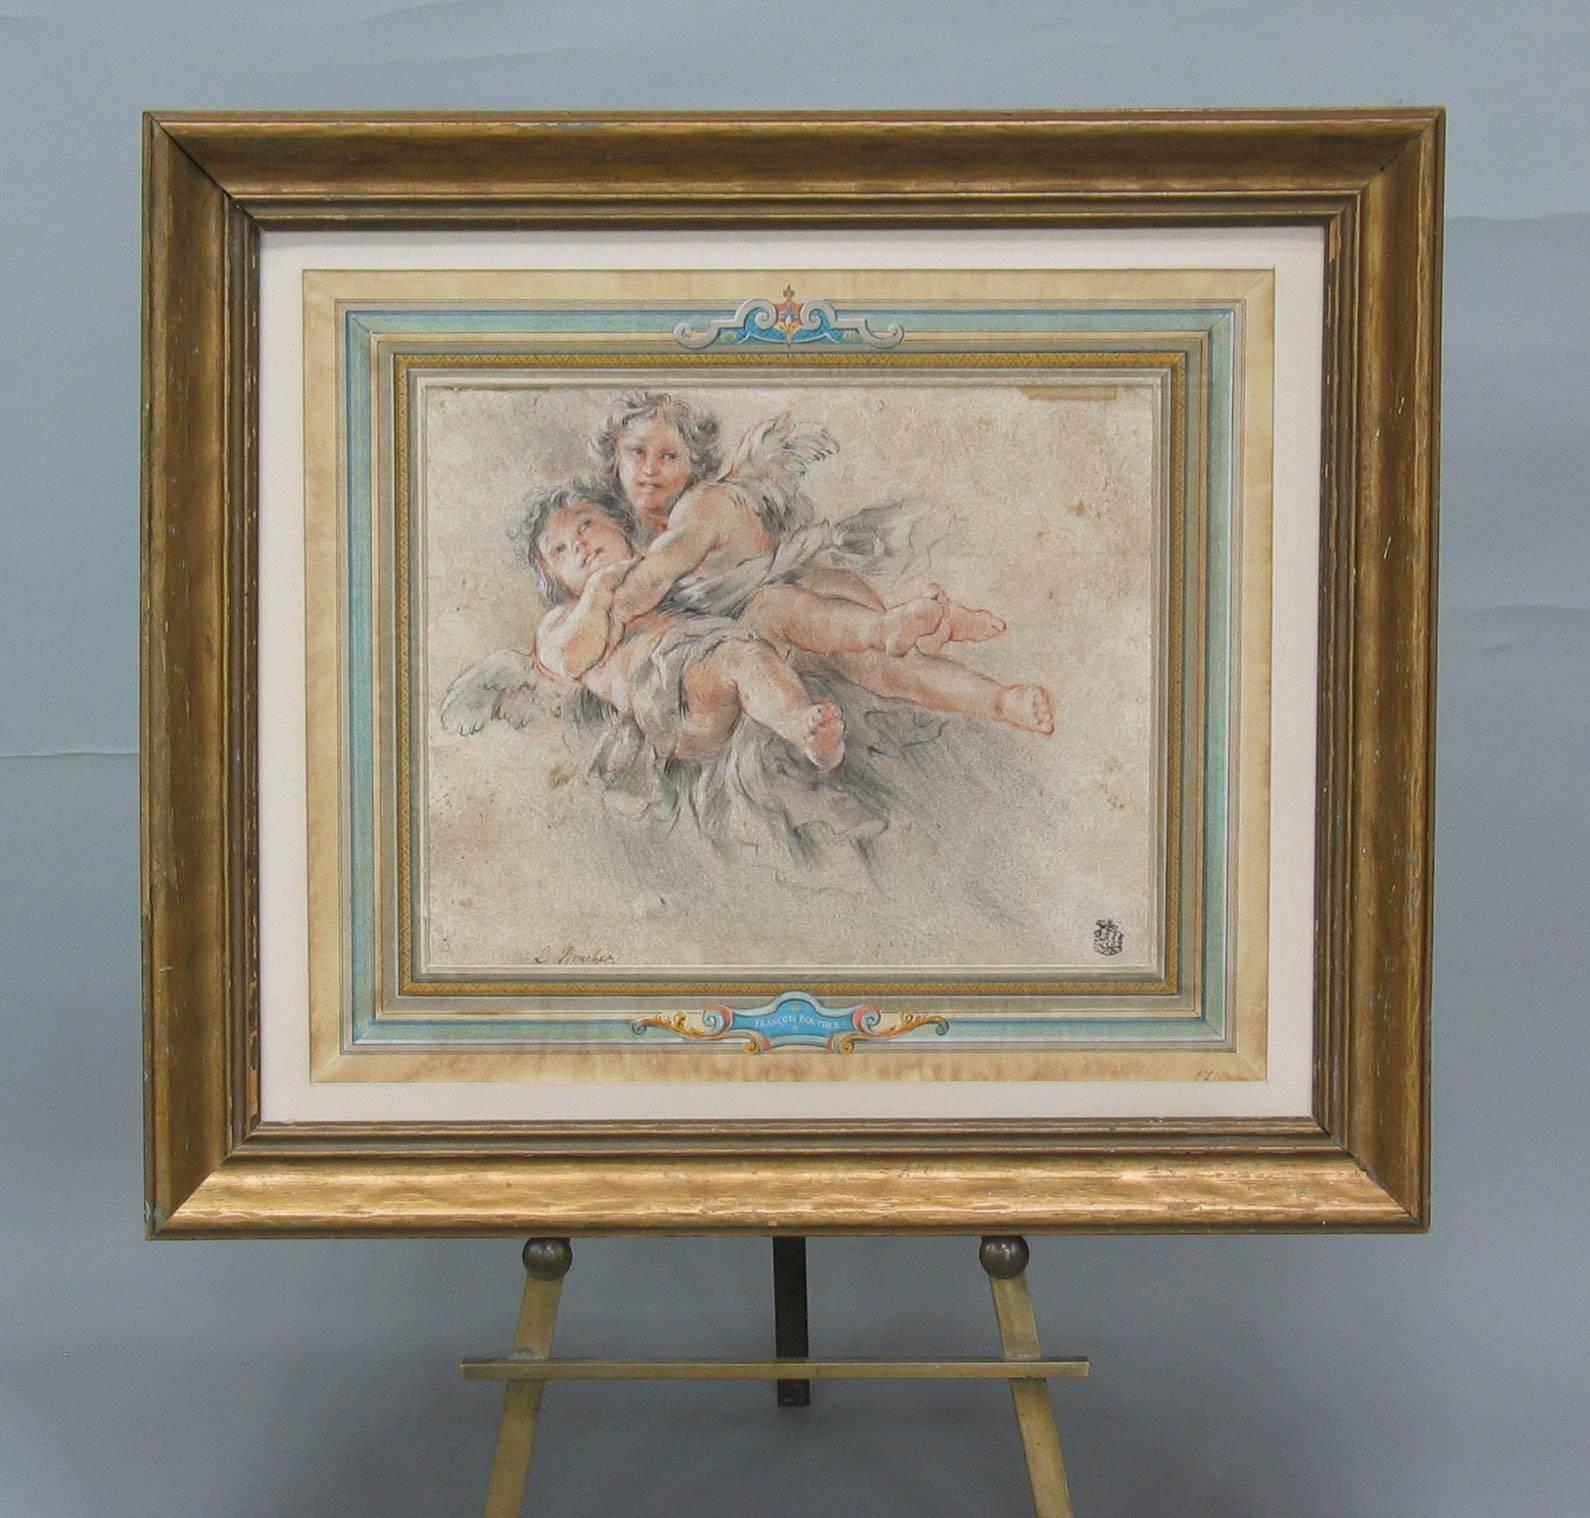 Two Putti's in Flight Attributed to Francois Boucher (Paris 1703-1770), Black chalk and stamping, with red and white chalk on buff paper. Bears signature in pen and brown ink: F.Boucher (l.l.) with an unidentified collectors mark (l.r.) in an